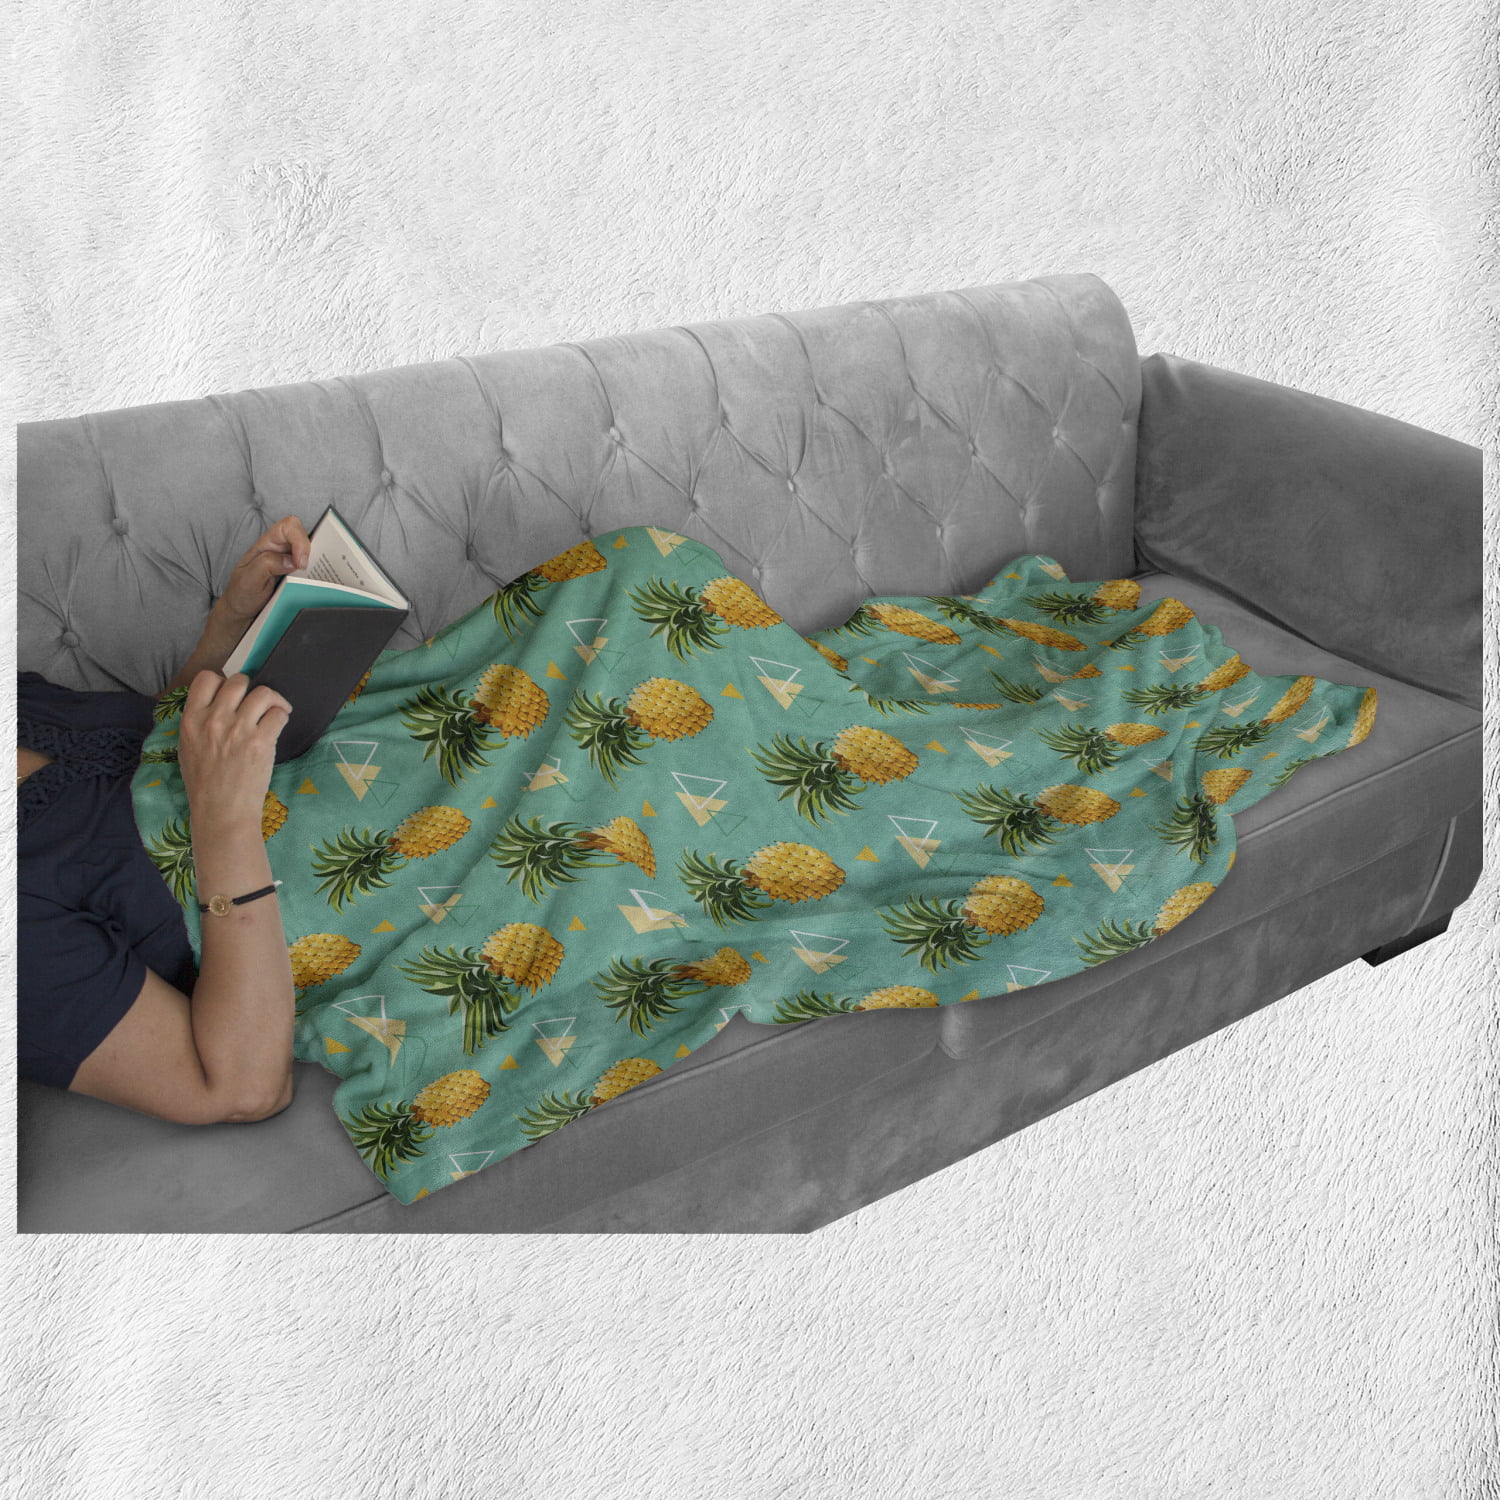 50 x 70 Ambesonne Pineapple Throw Blanket Hipster and Pineapples Tropic Fruits Design with Triangles Flannel Fleece Accent Piece Soft Couch Cover for Adults Turquoise Ginger Green 